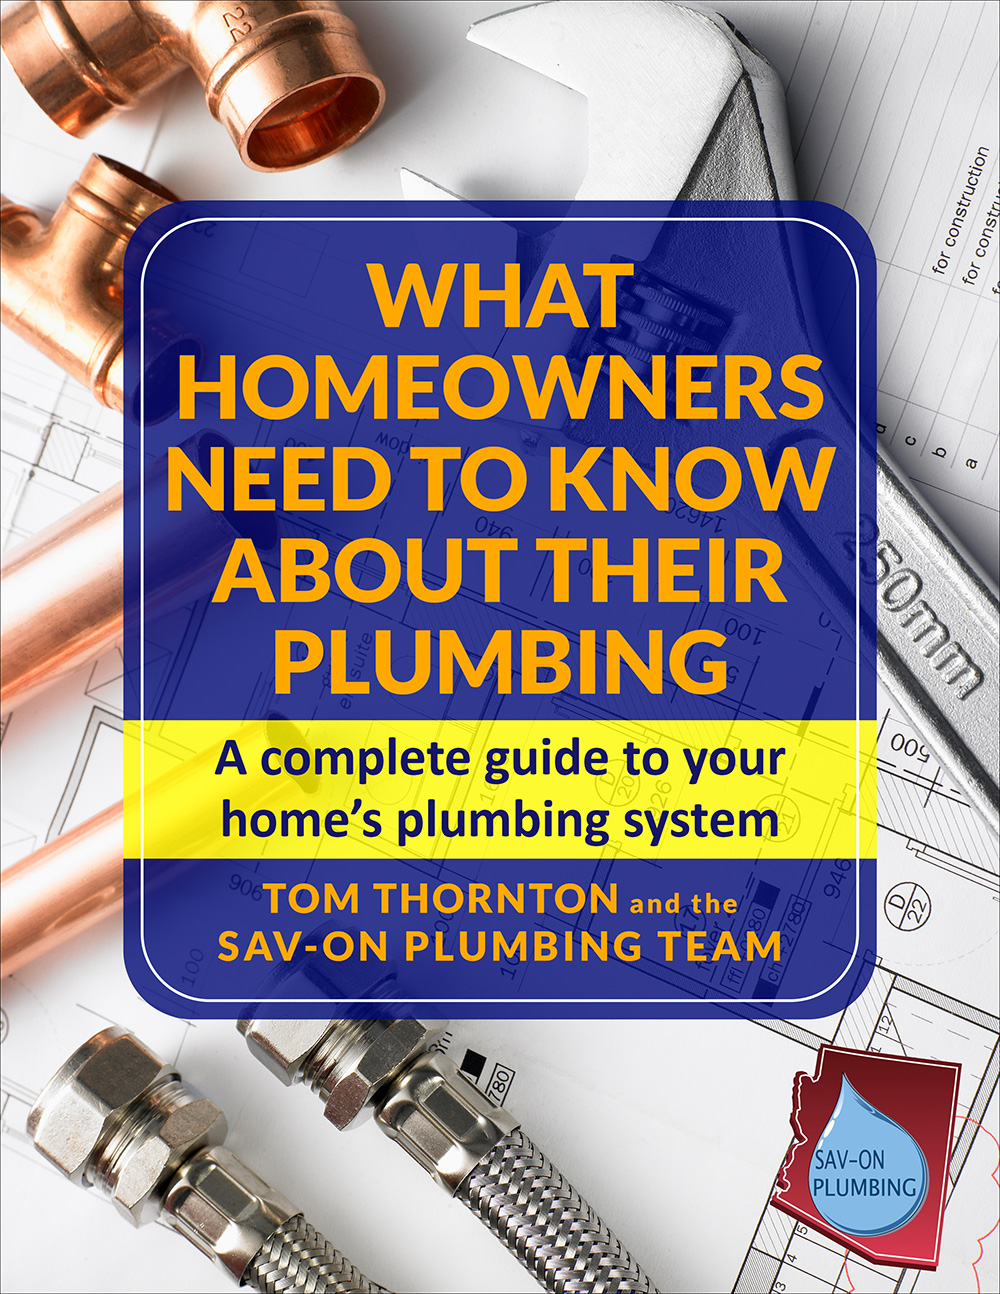 Valley Residents Can Now Get Their Plumbing Questions Answered with Sav-On Plumbing’s Free Phoenix Homeowners Plumbing Guide